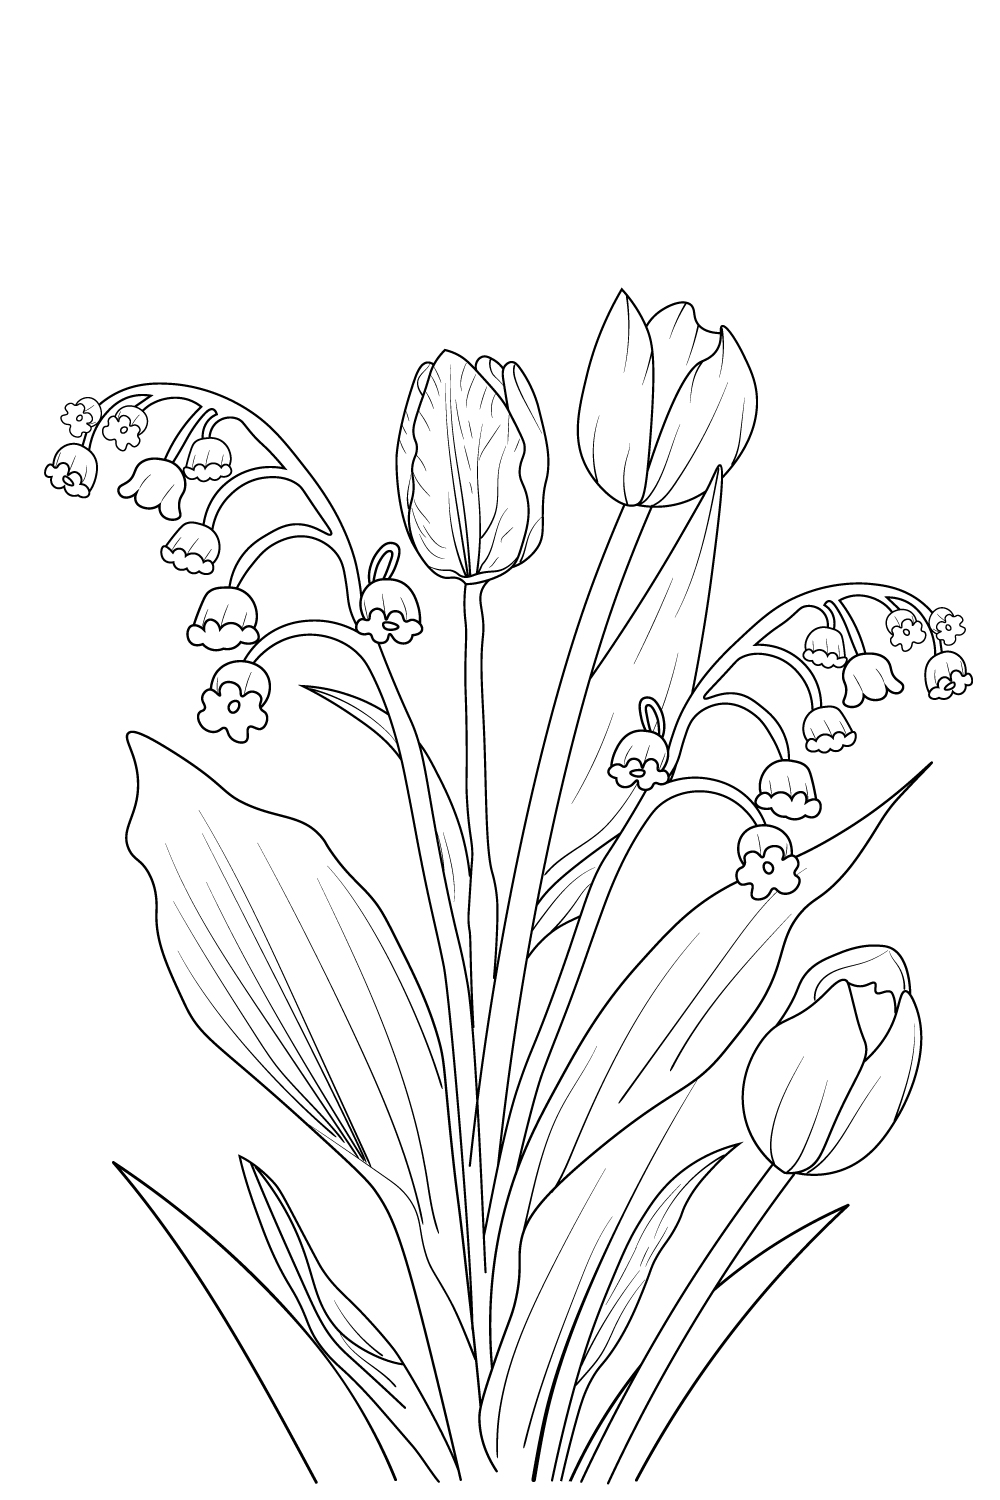 tulip illustration simple, vintage tulip illustration, tulip flower drawing, pencil realistic tulip drawing, pinterest preview image.